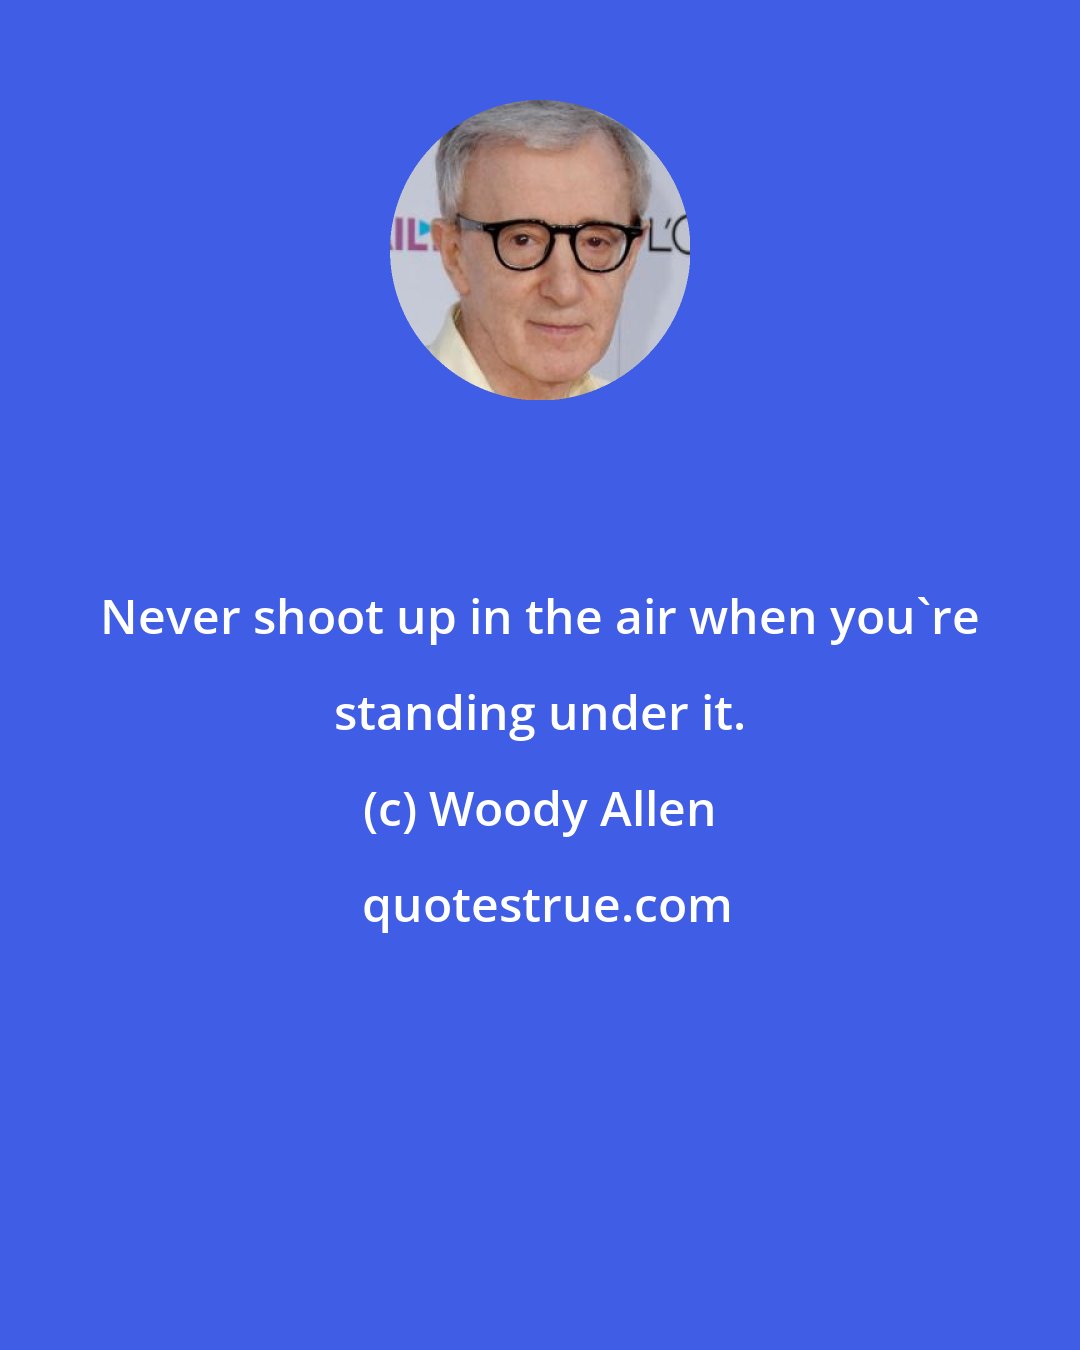 Woody Allen: Never shoot up in the air when you're standing under it.